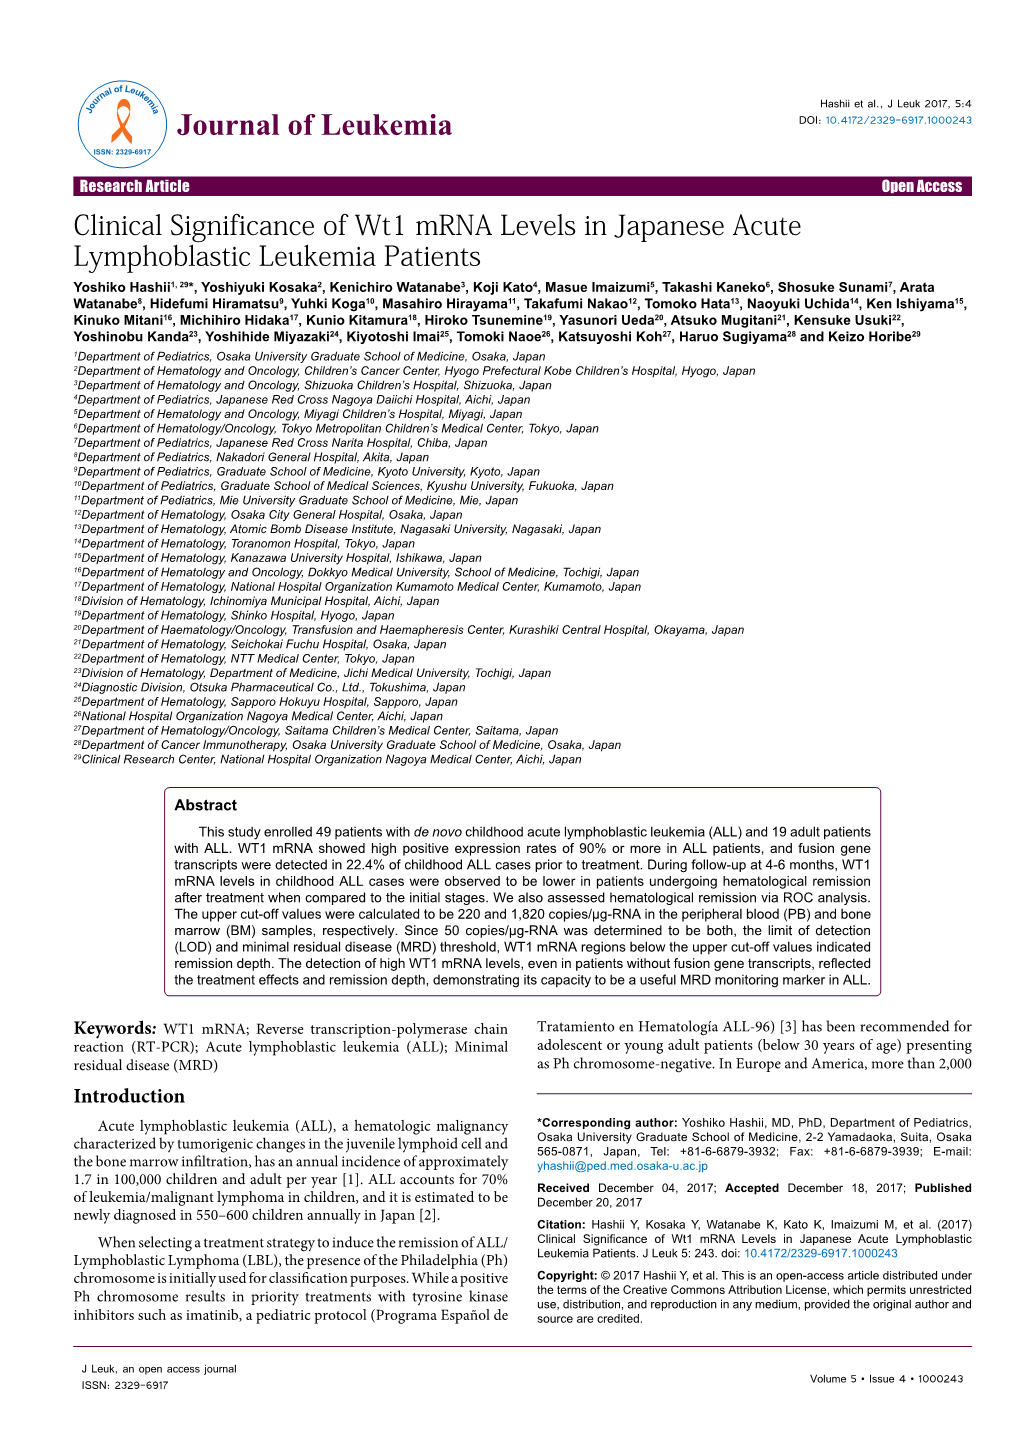 Clinical Significance of Wt1 Mrna Levels in Japanese Acute